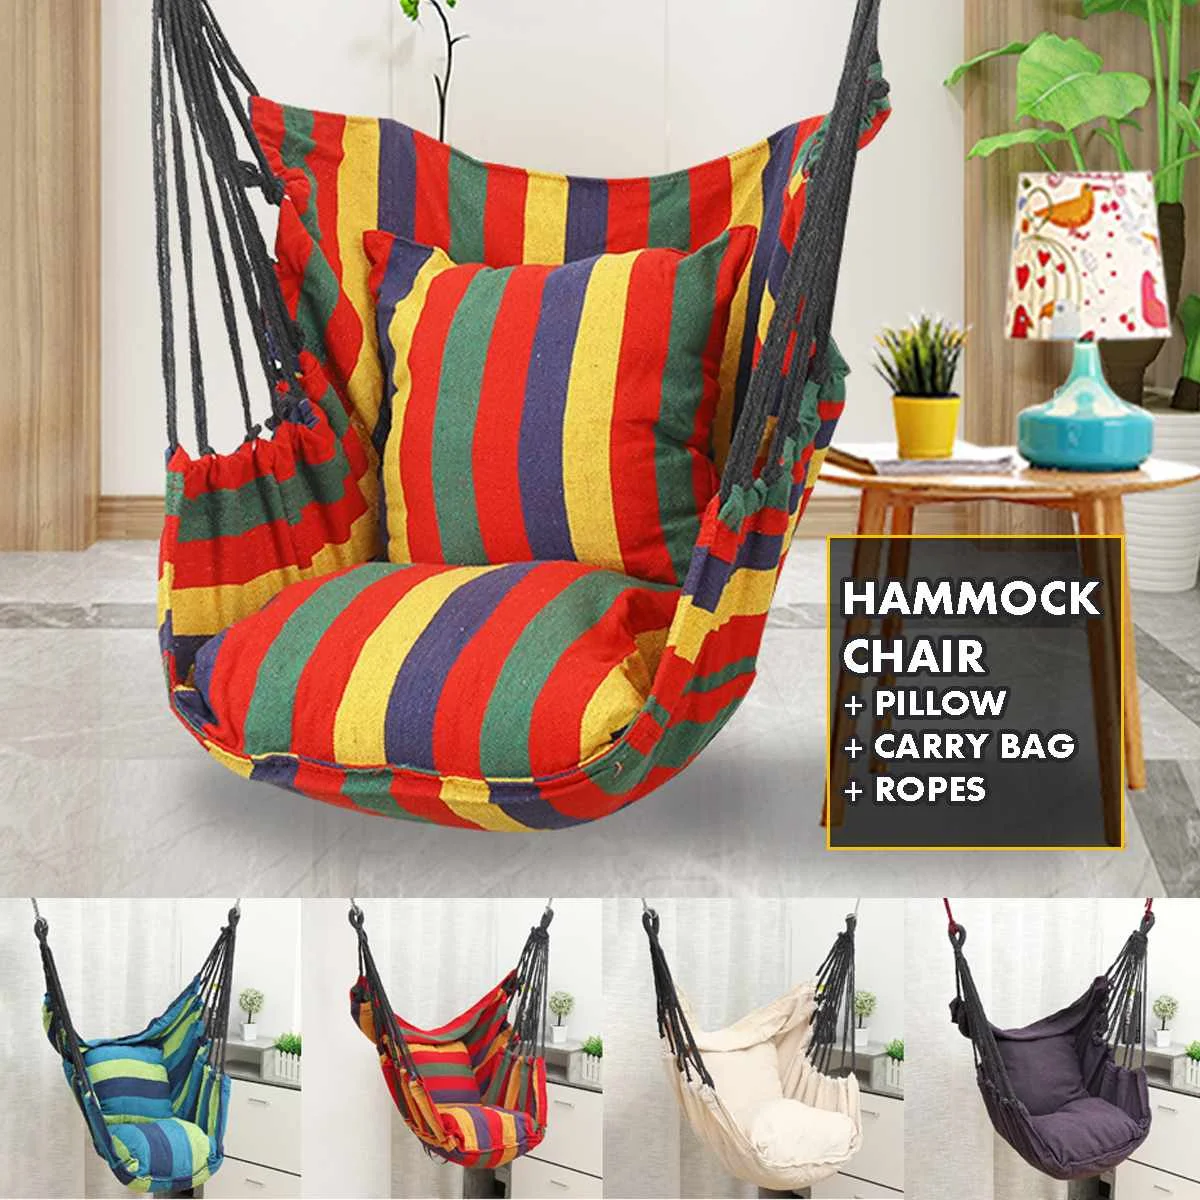 Portable Hammock Hanging Rope Chair Swing Chair Seat w/ 2 Pillows Garden Deck UK 